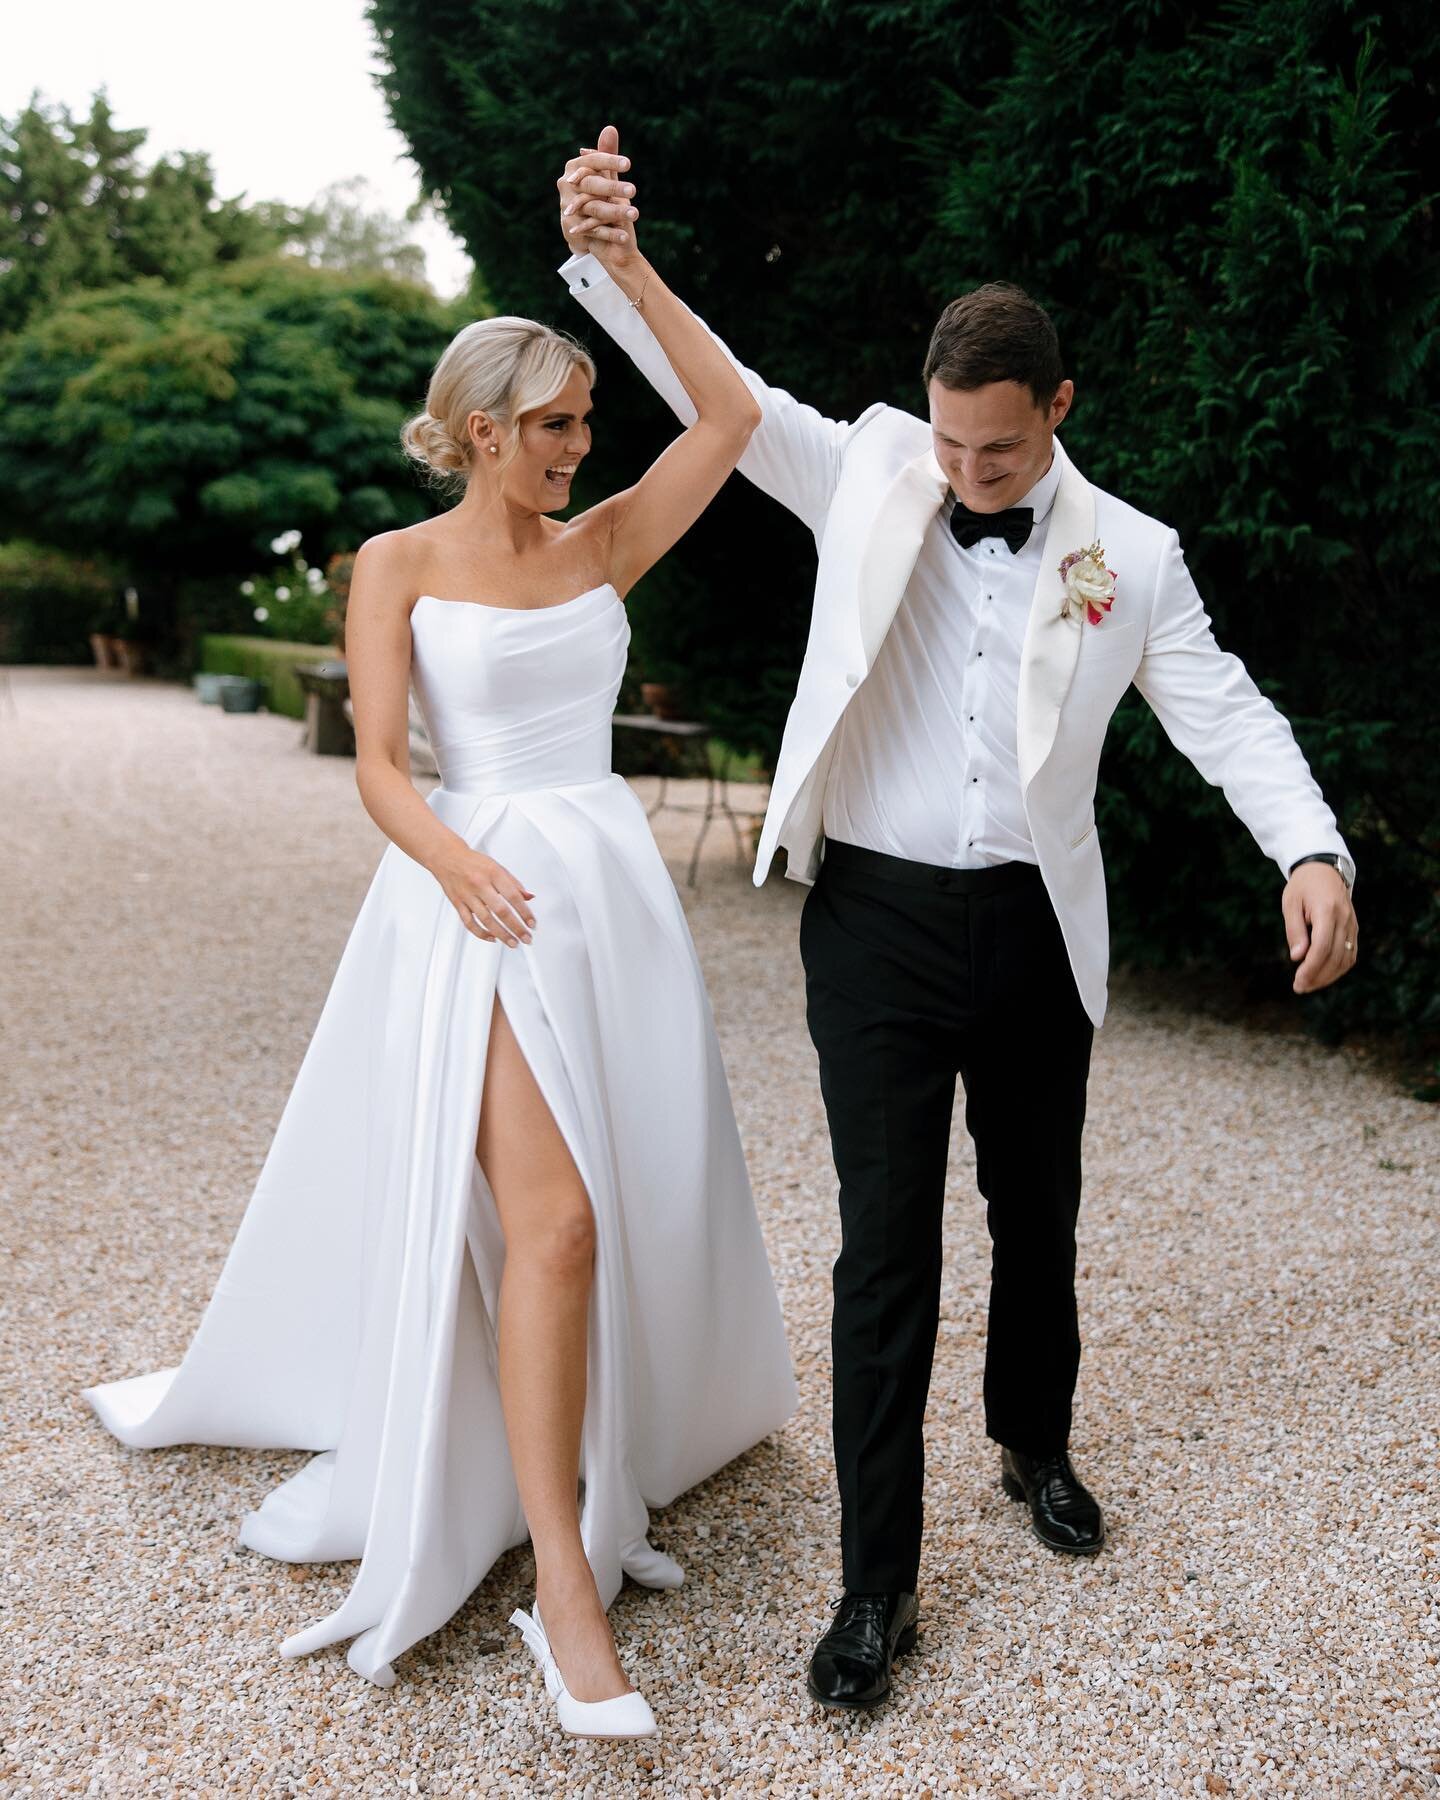 Persia &amp; Josh&rsquo;s NYE wedding had guests dancing to all the big players: Kylie, Calvin, Ricky, Bey, Shaggy, and J.Lo - Amongst other certified legends. 

What we love most is that guests couldn&rsquo;t get enough of it, they told P&amp;J they